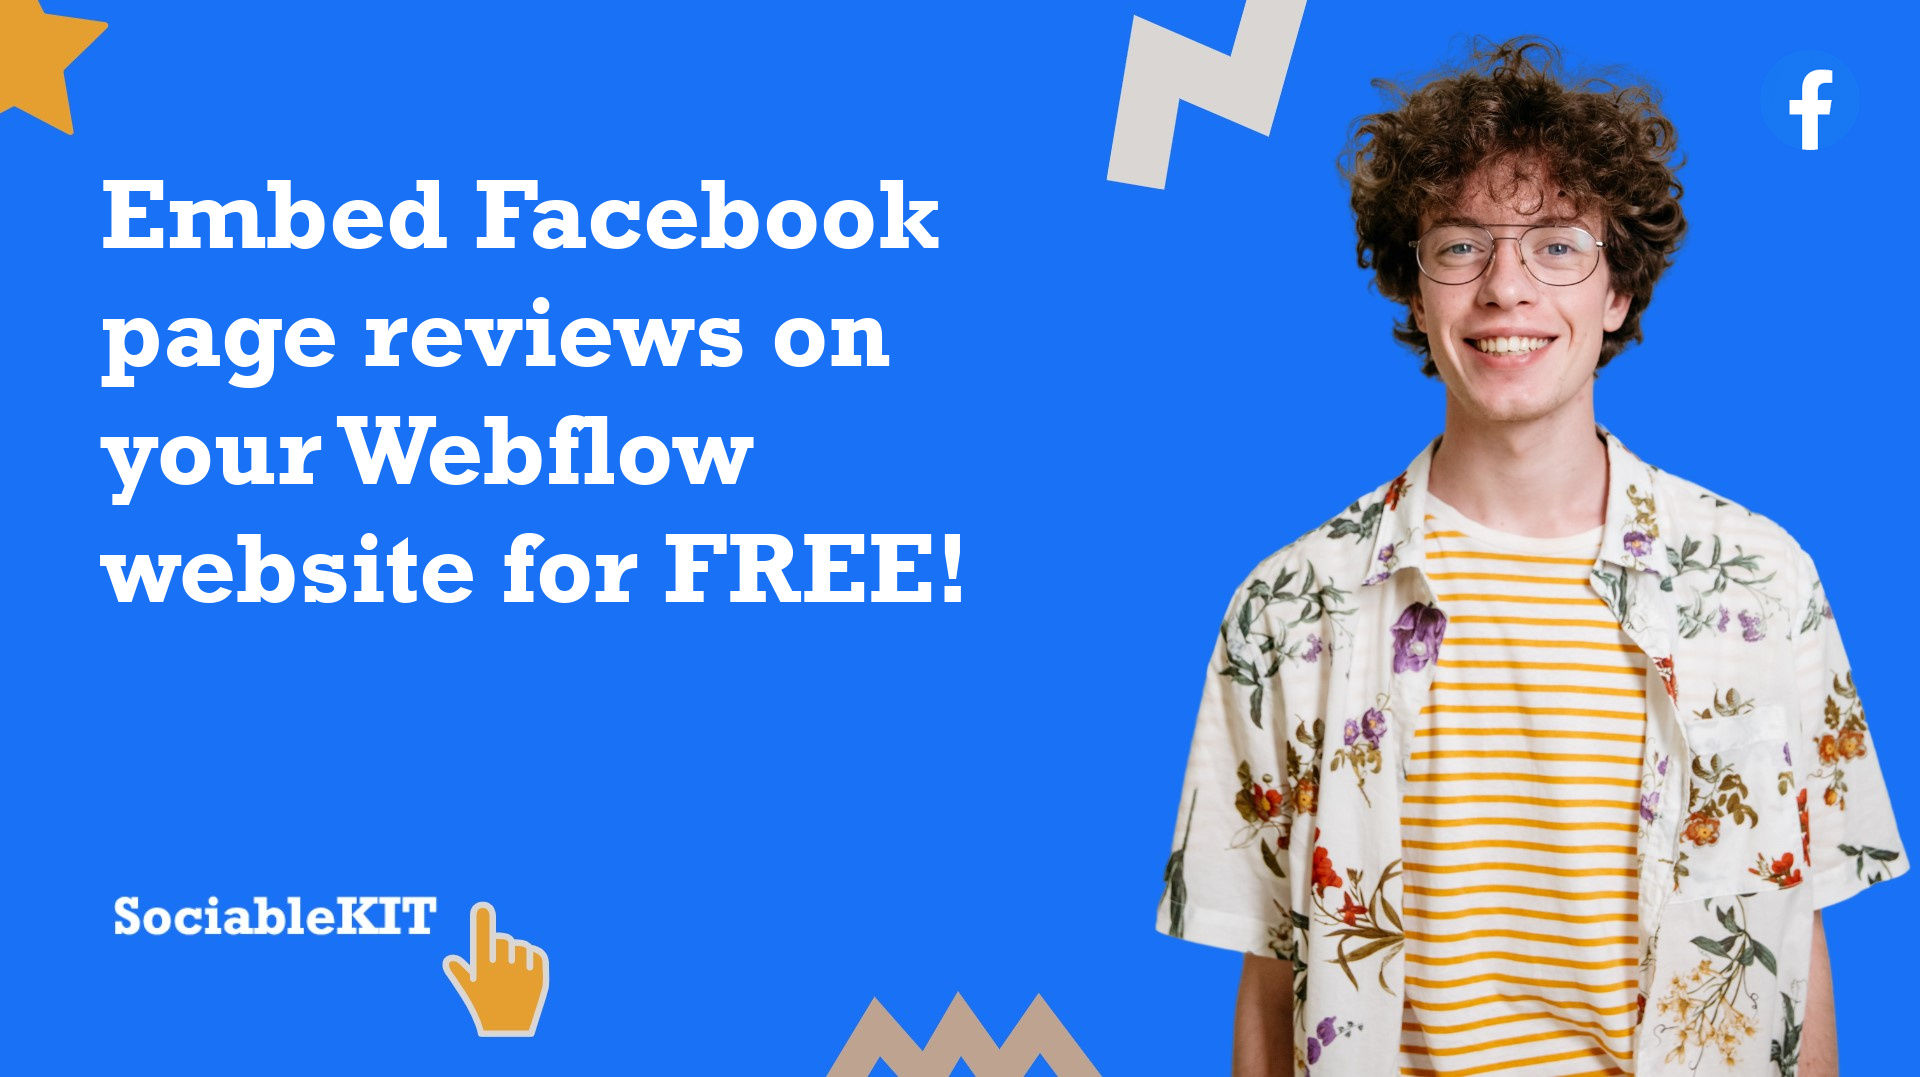 How to embed Facebook page reviews on your Webflow website for FREE?